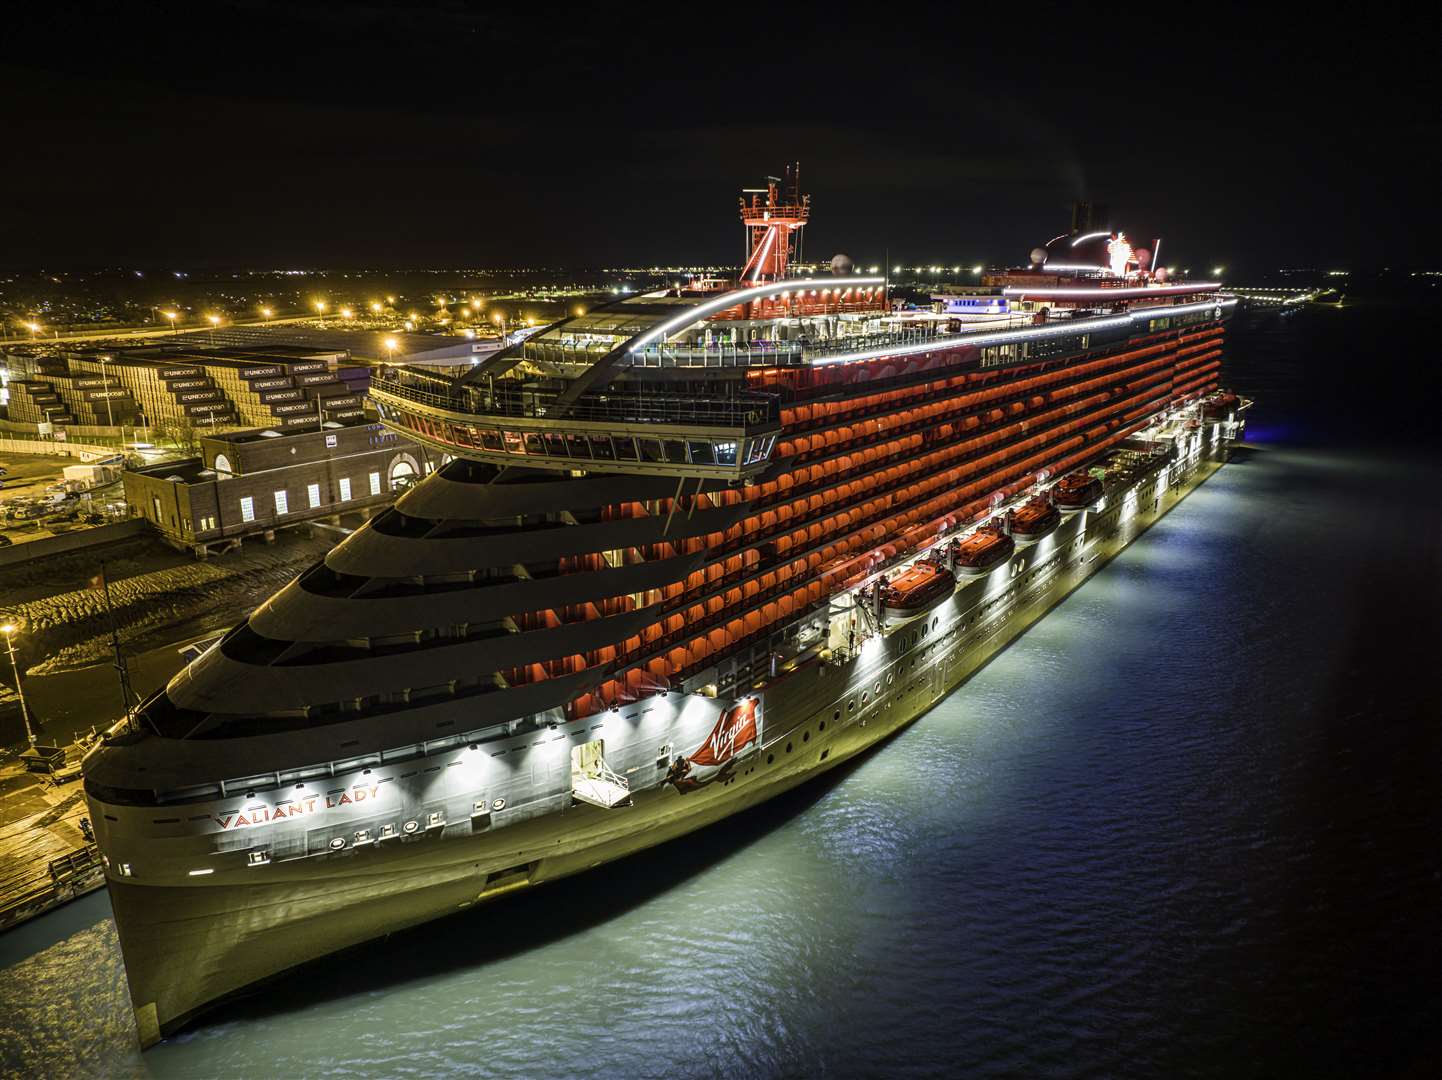 The Valiant Lady cruise ship lit up at night, docked off Gravesend. Picture: Mark Dillen / Skyshark Media